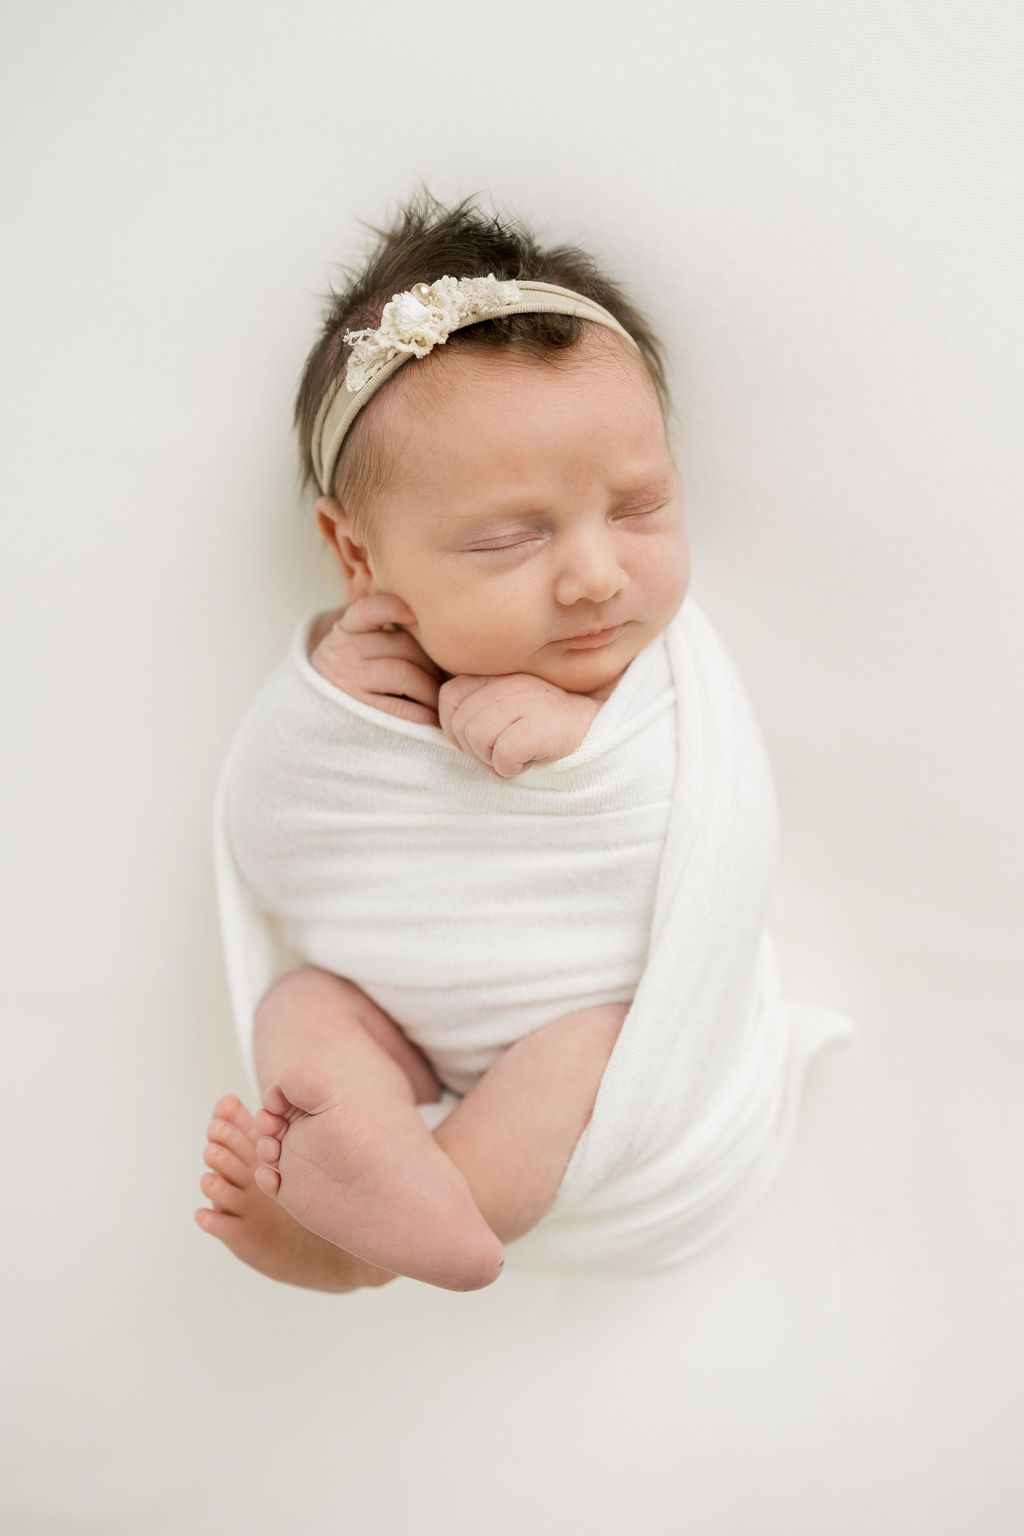 newborn baby wrapped in a white swaddle with a flower bow baby crossing